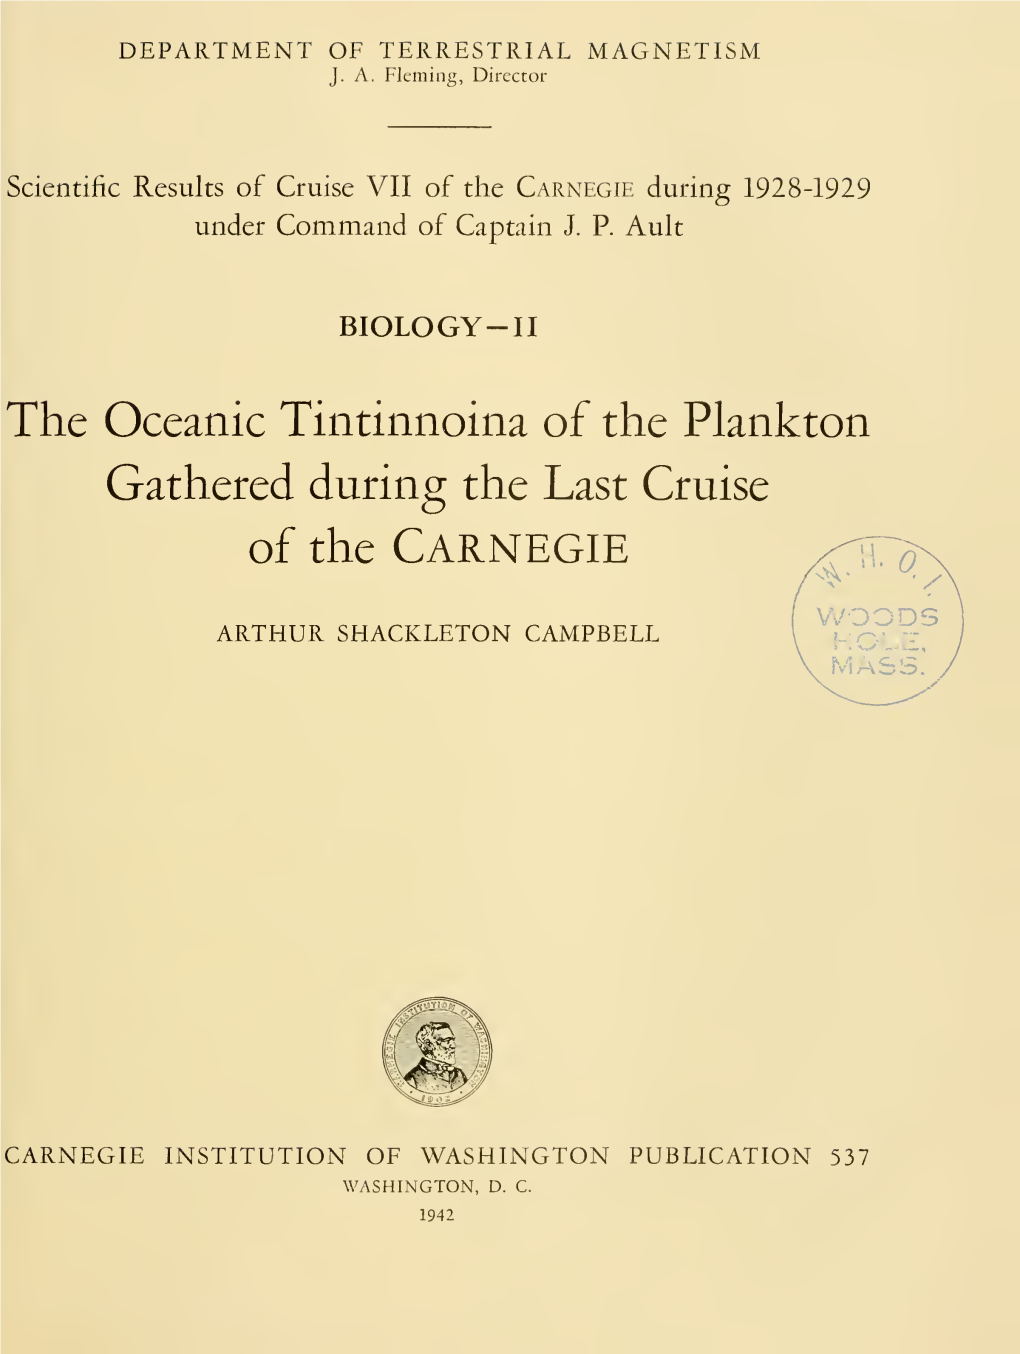 Scientific Results of Cruise VII of the Carnegie During 1928-1929 Under